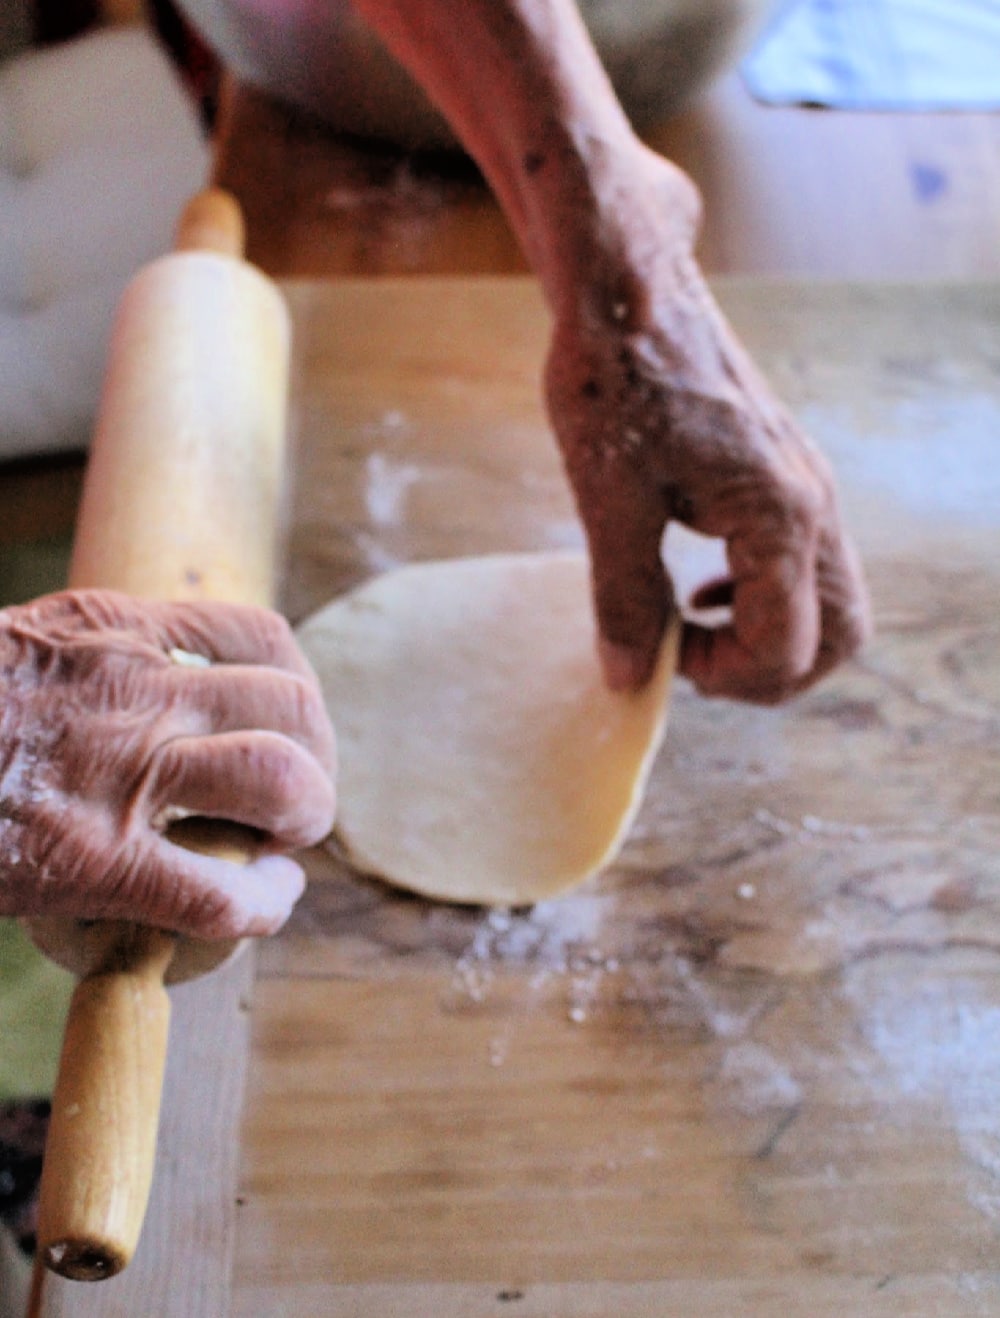 Hand holding a rolling pin and with the other hand flipping the rolled out dough.